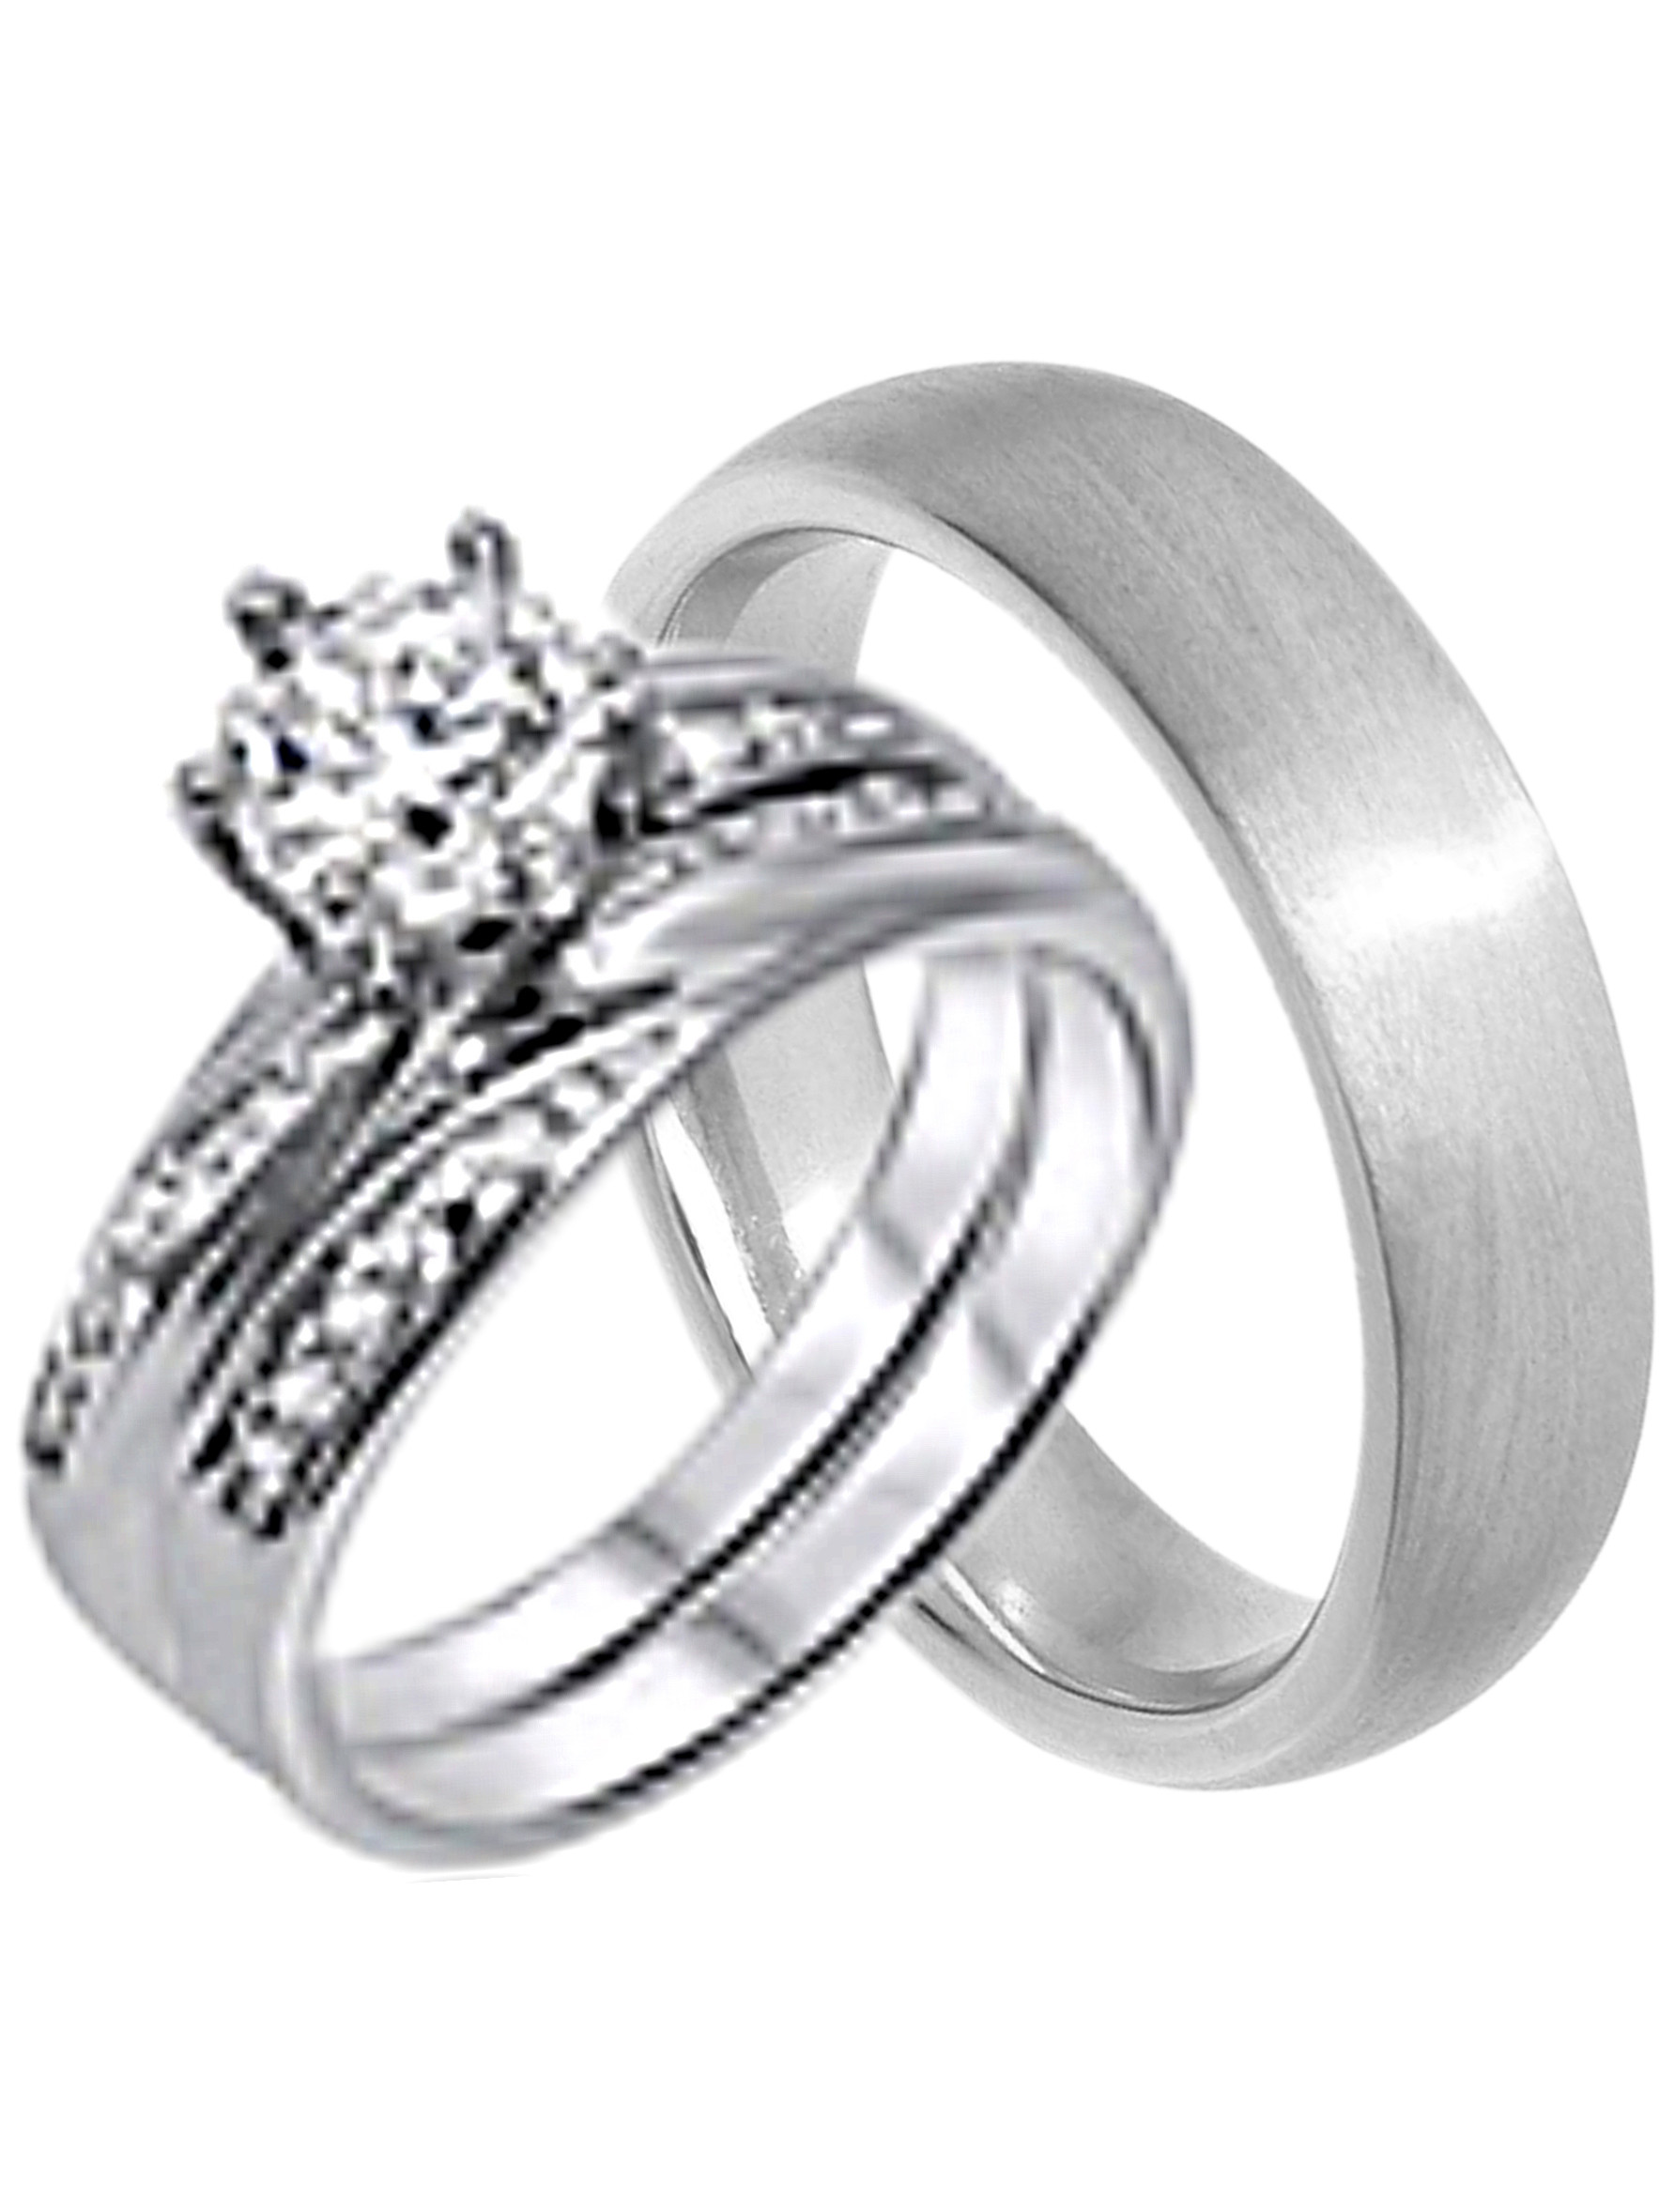 Wedding Band Sets Cheap
 His and Hers Wedding Ring Set Cheap Wedding Bands for Him